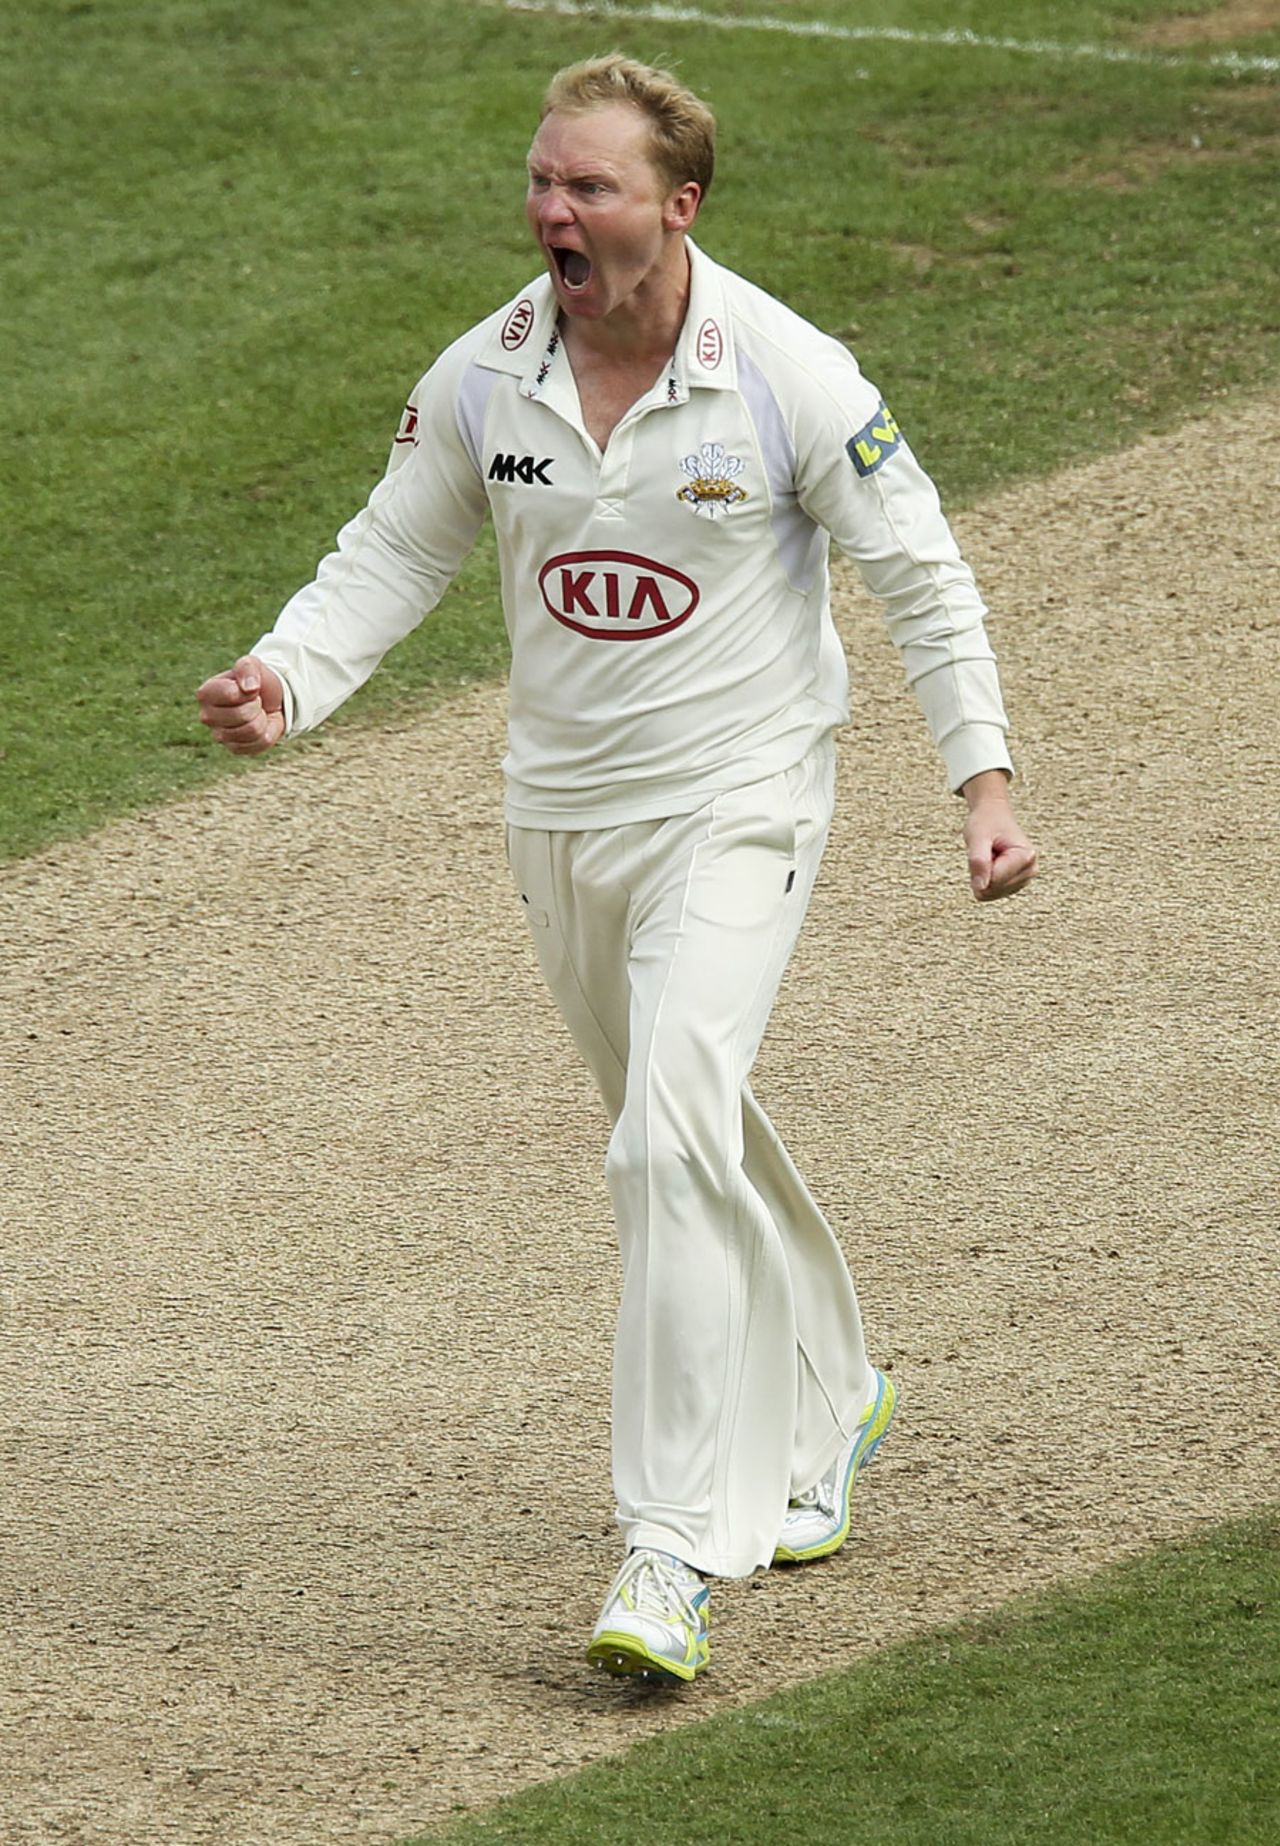 Gareth Batty took 2 for 52, Surrey v Middlesex, County Championship, The Oval, 2nd day, August, 26, 2012